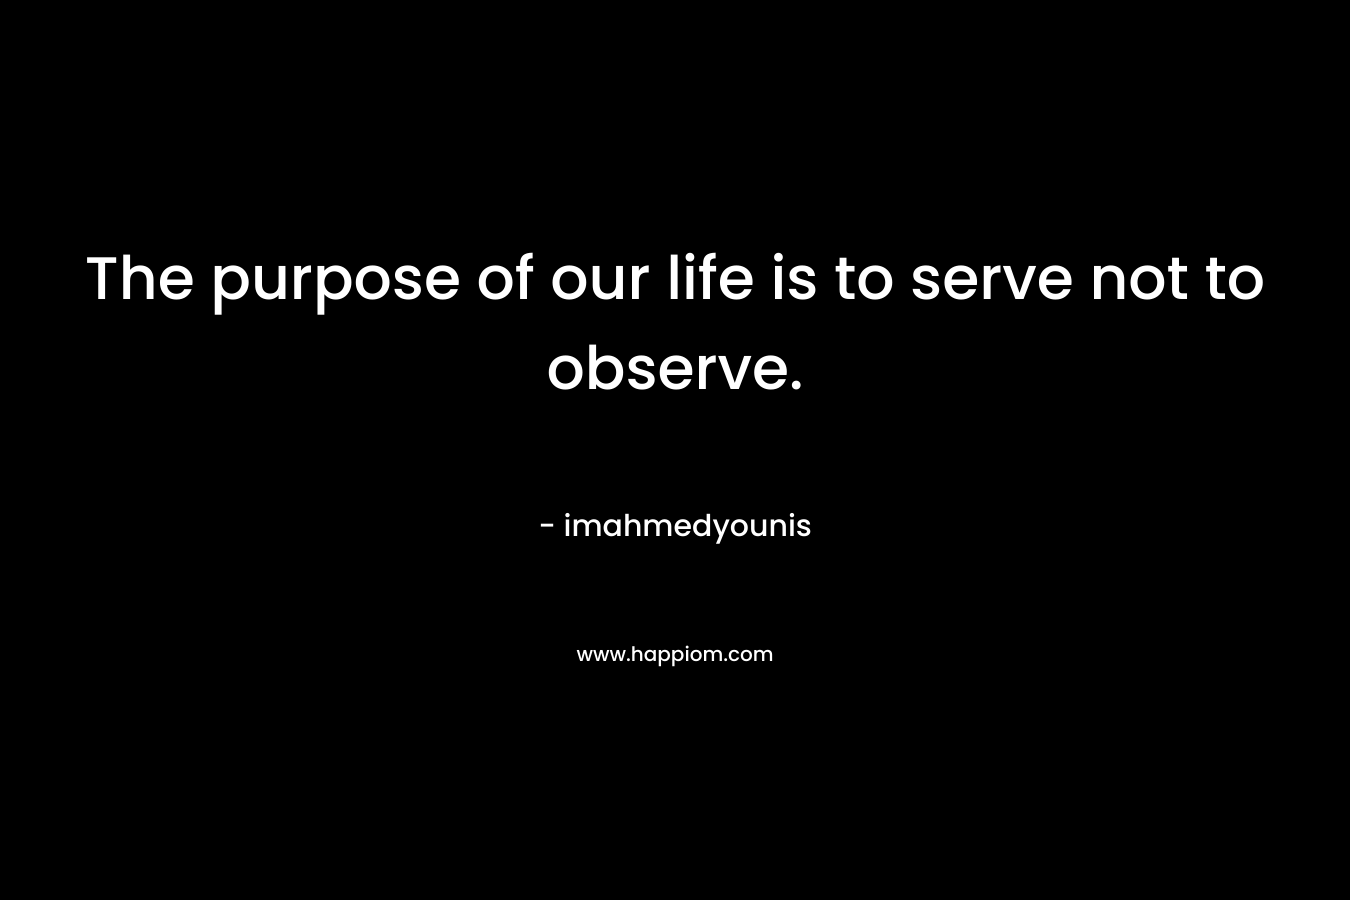 The purpose of our life is to serve not to observe. – imahmedyounis